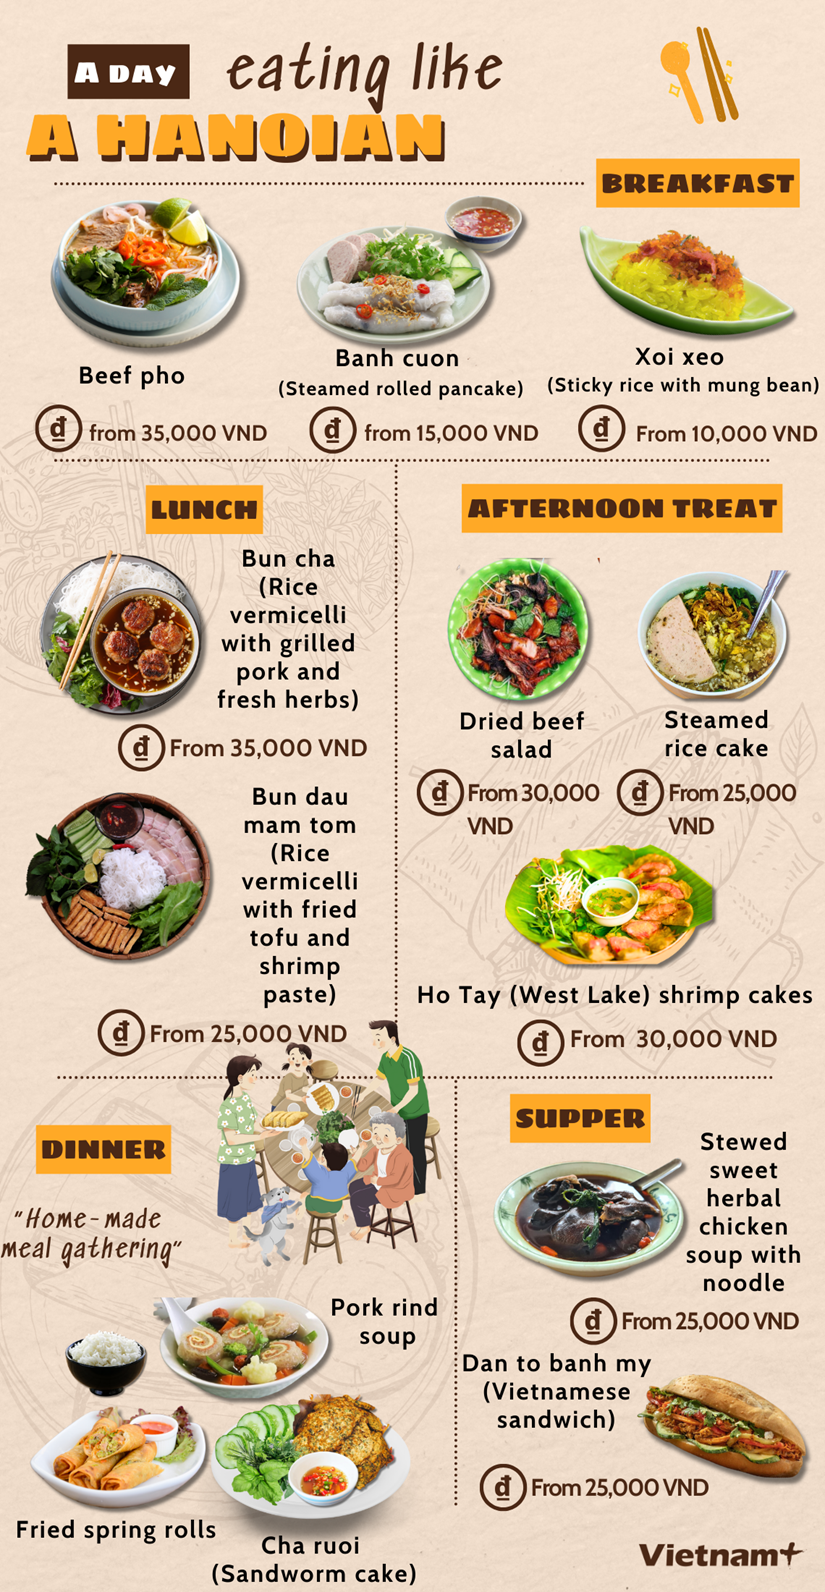 Eat like a Hanoian through typical daily dishes hinh anh 1